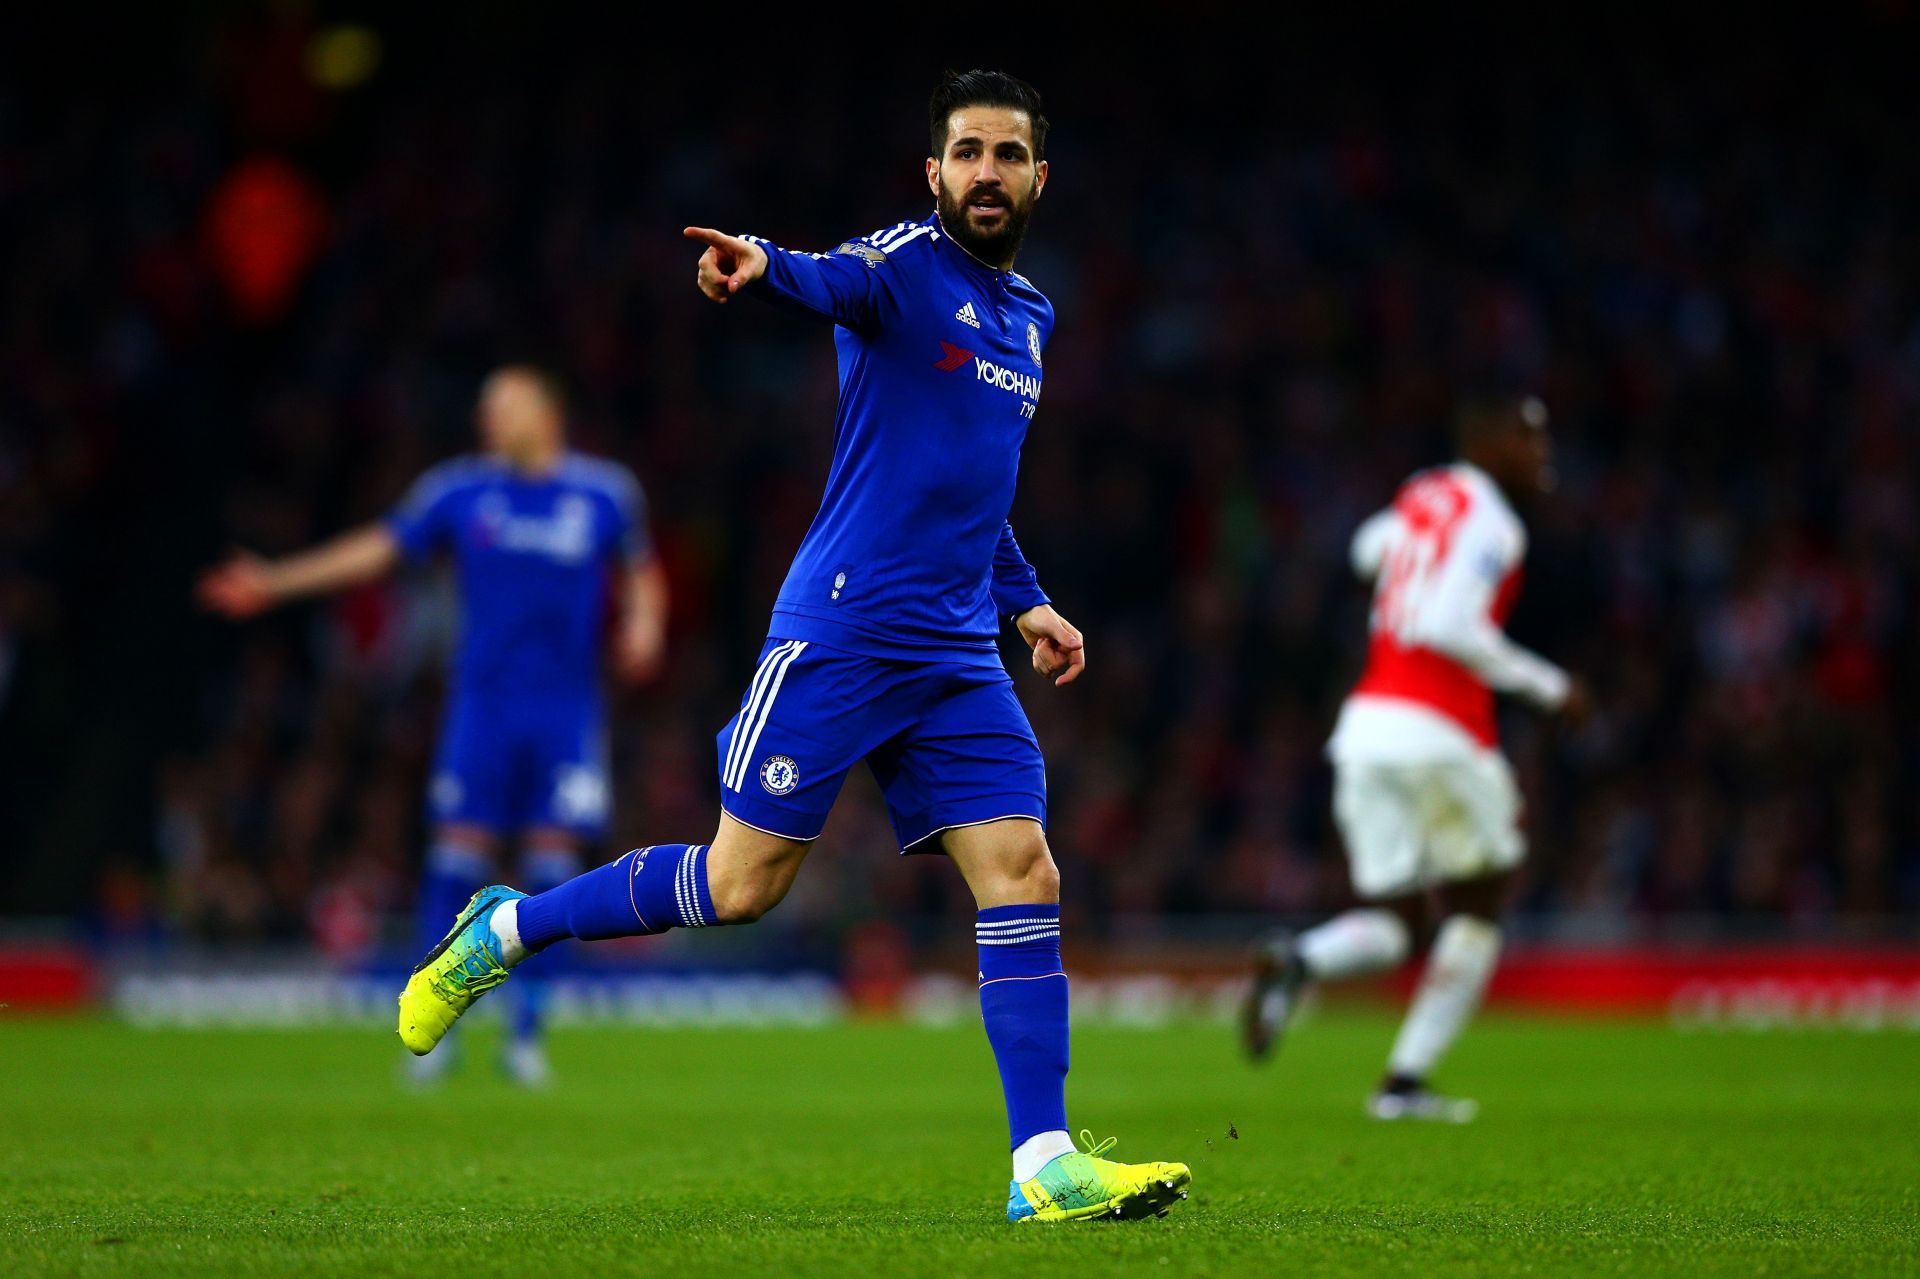 Cesc Fabregas touched on potential move to Manchester United.